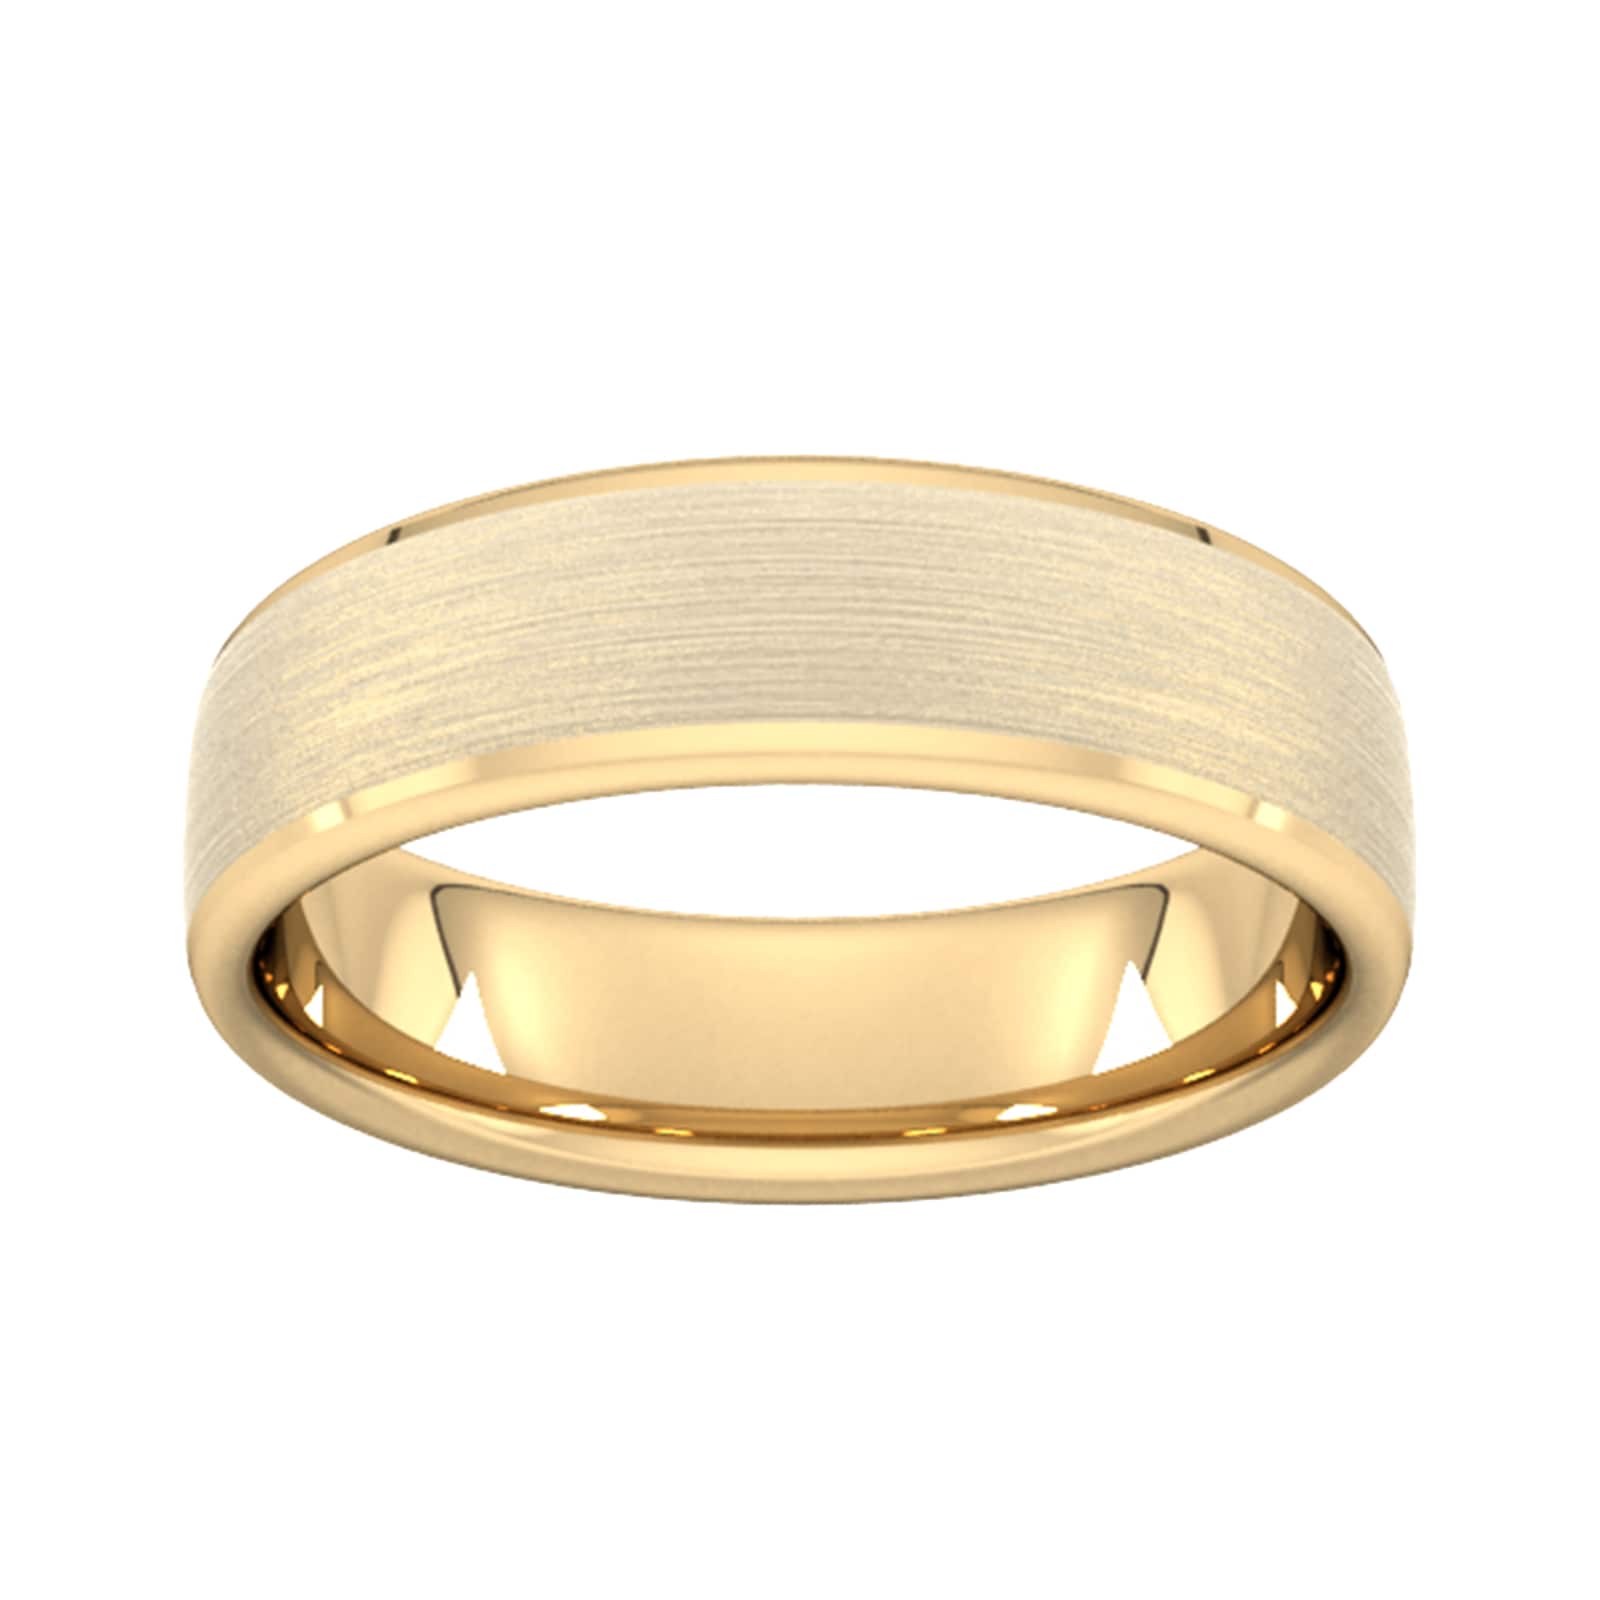 6mm Slight Court Heavy Polished Chamfered Edges With Matt Centre Wedding Ring In 18 Carat Yellow Gold - Ring Size M